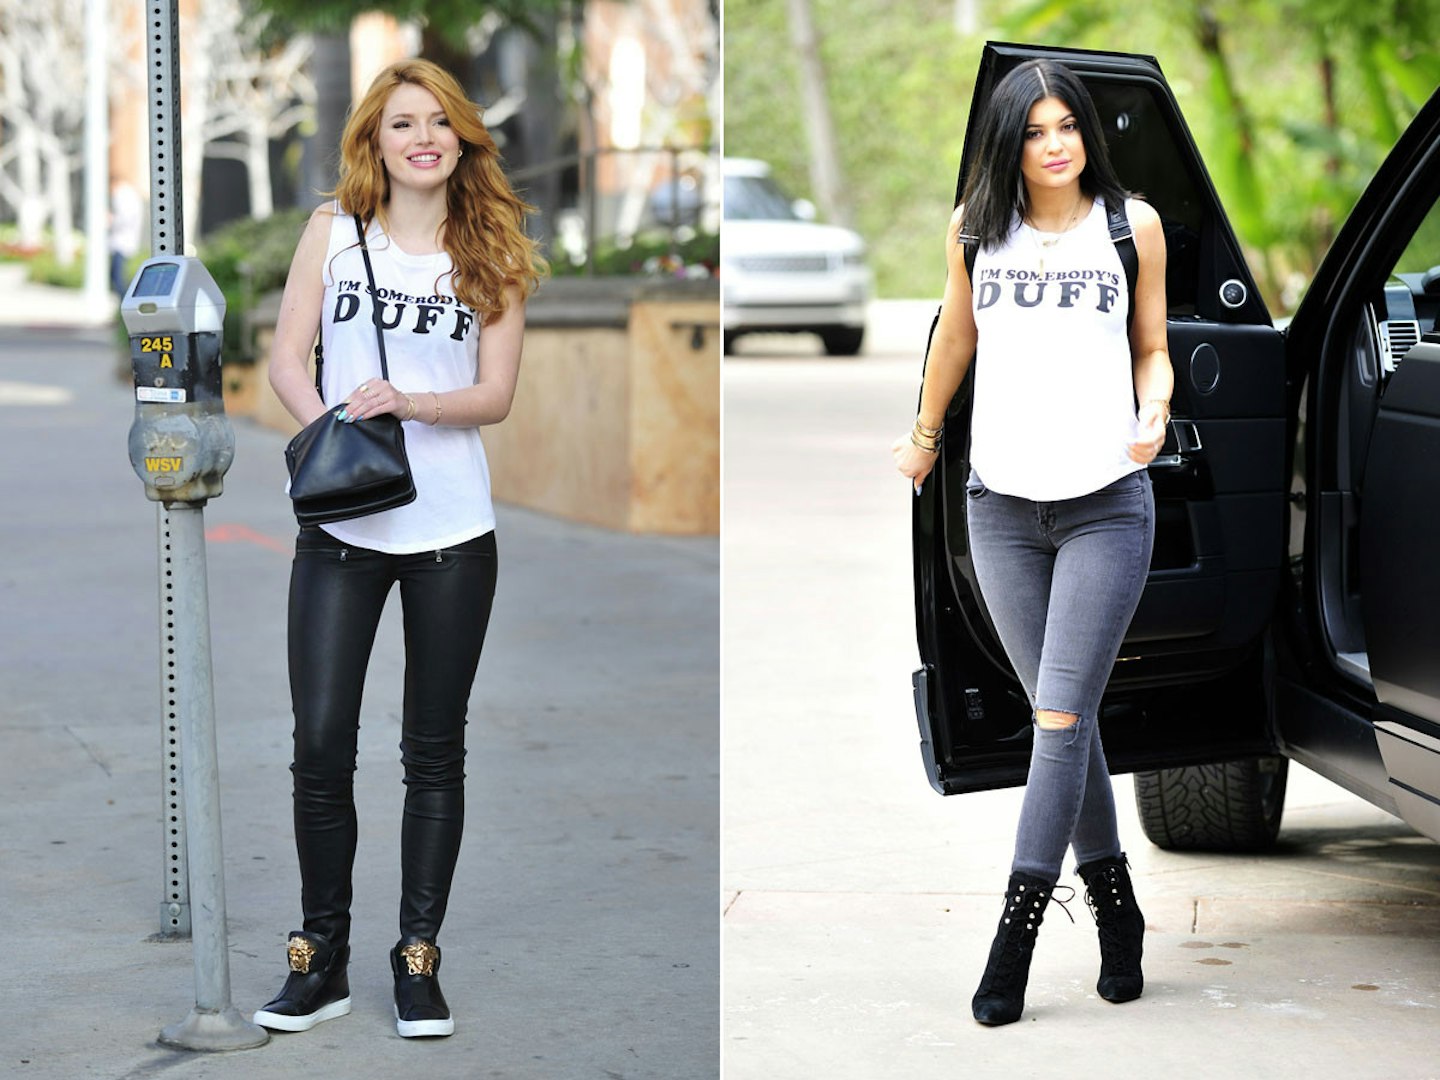 Kylie Jenner and Bella Thorne wearing 'I'm Somebody's DUFF' t shirts [Rex]